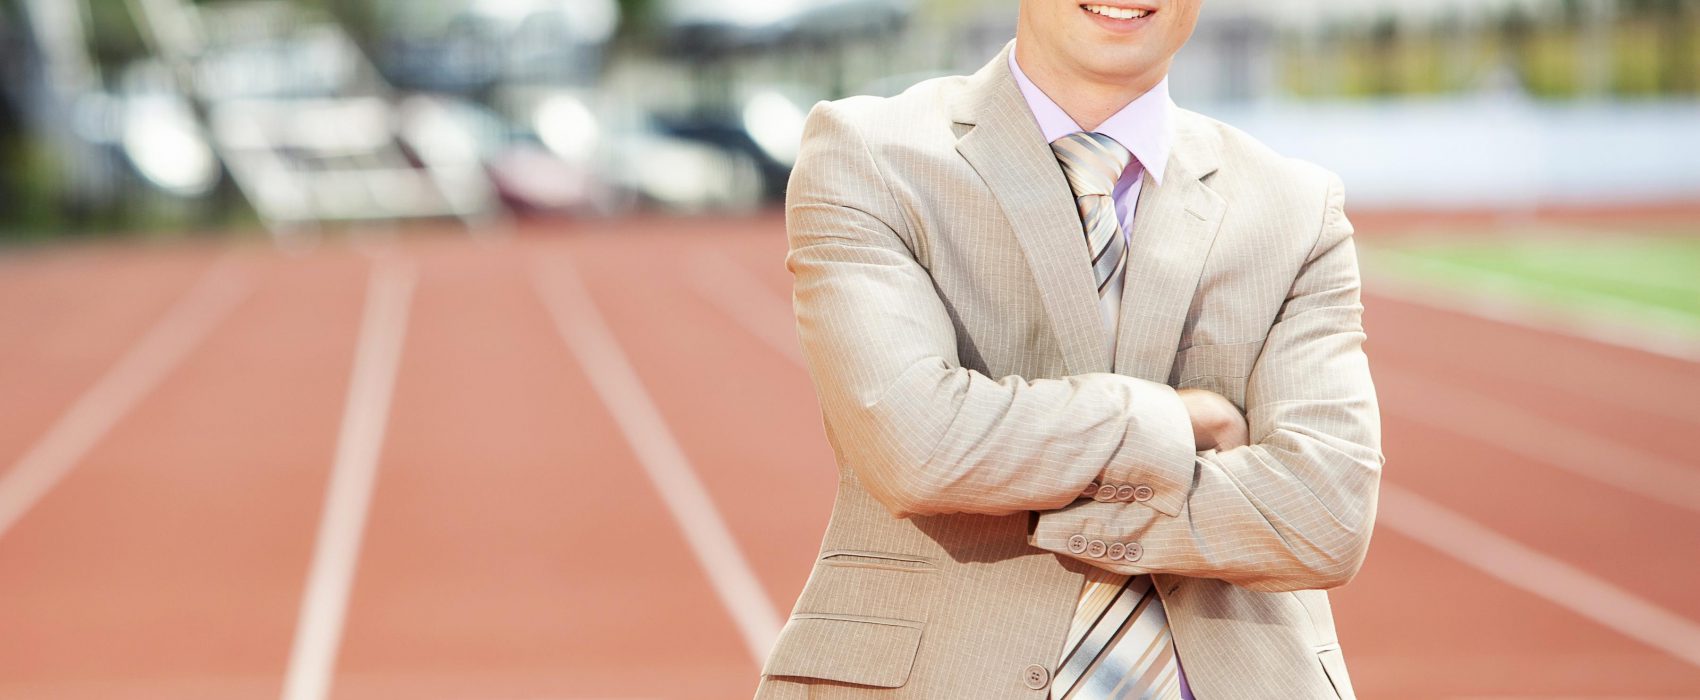 how to become an athletic director